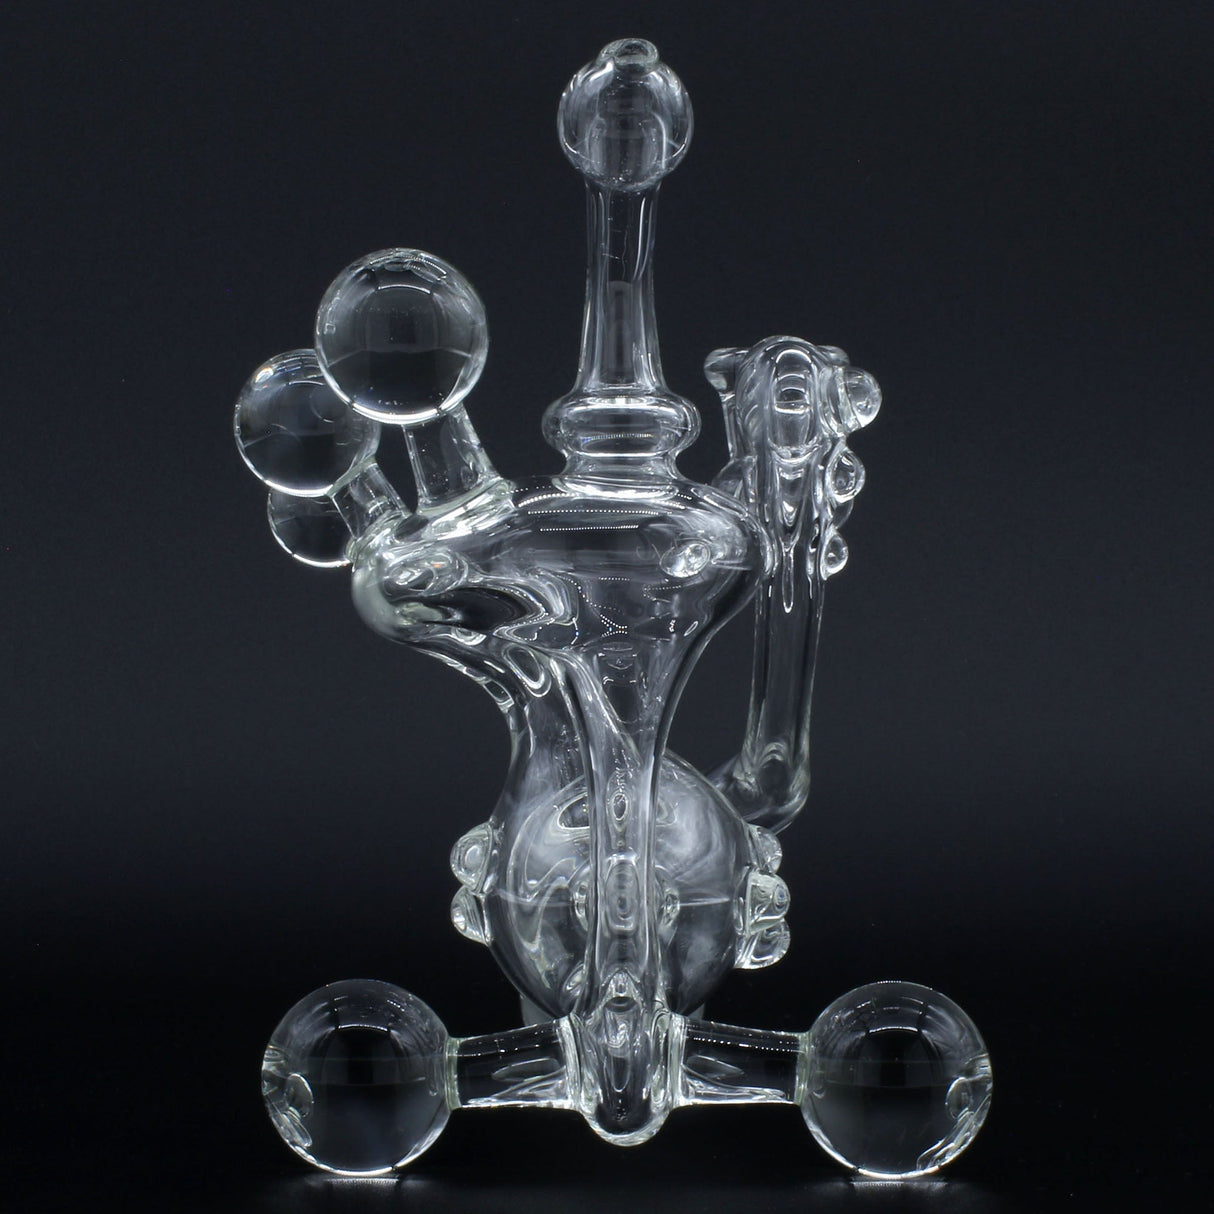 Clayball Glass 'Translucent Dreams' Heady Recycler Dab-Rig Front View on Black